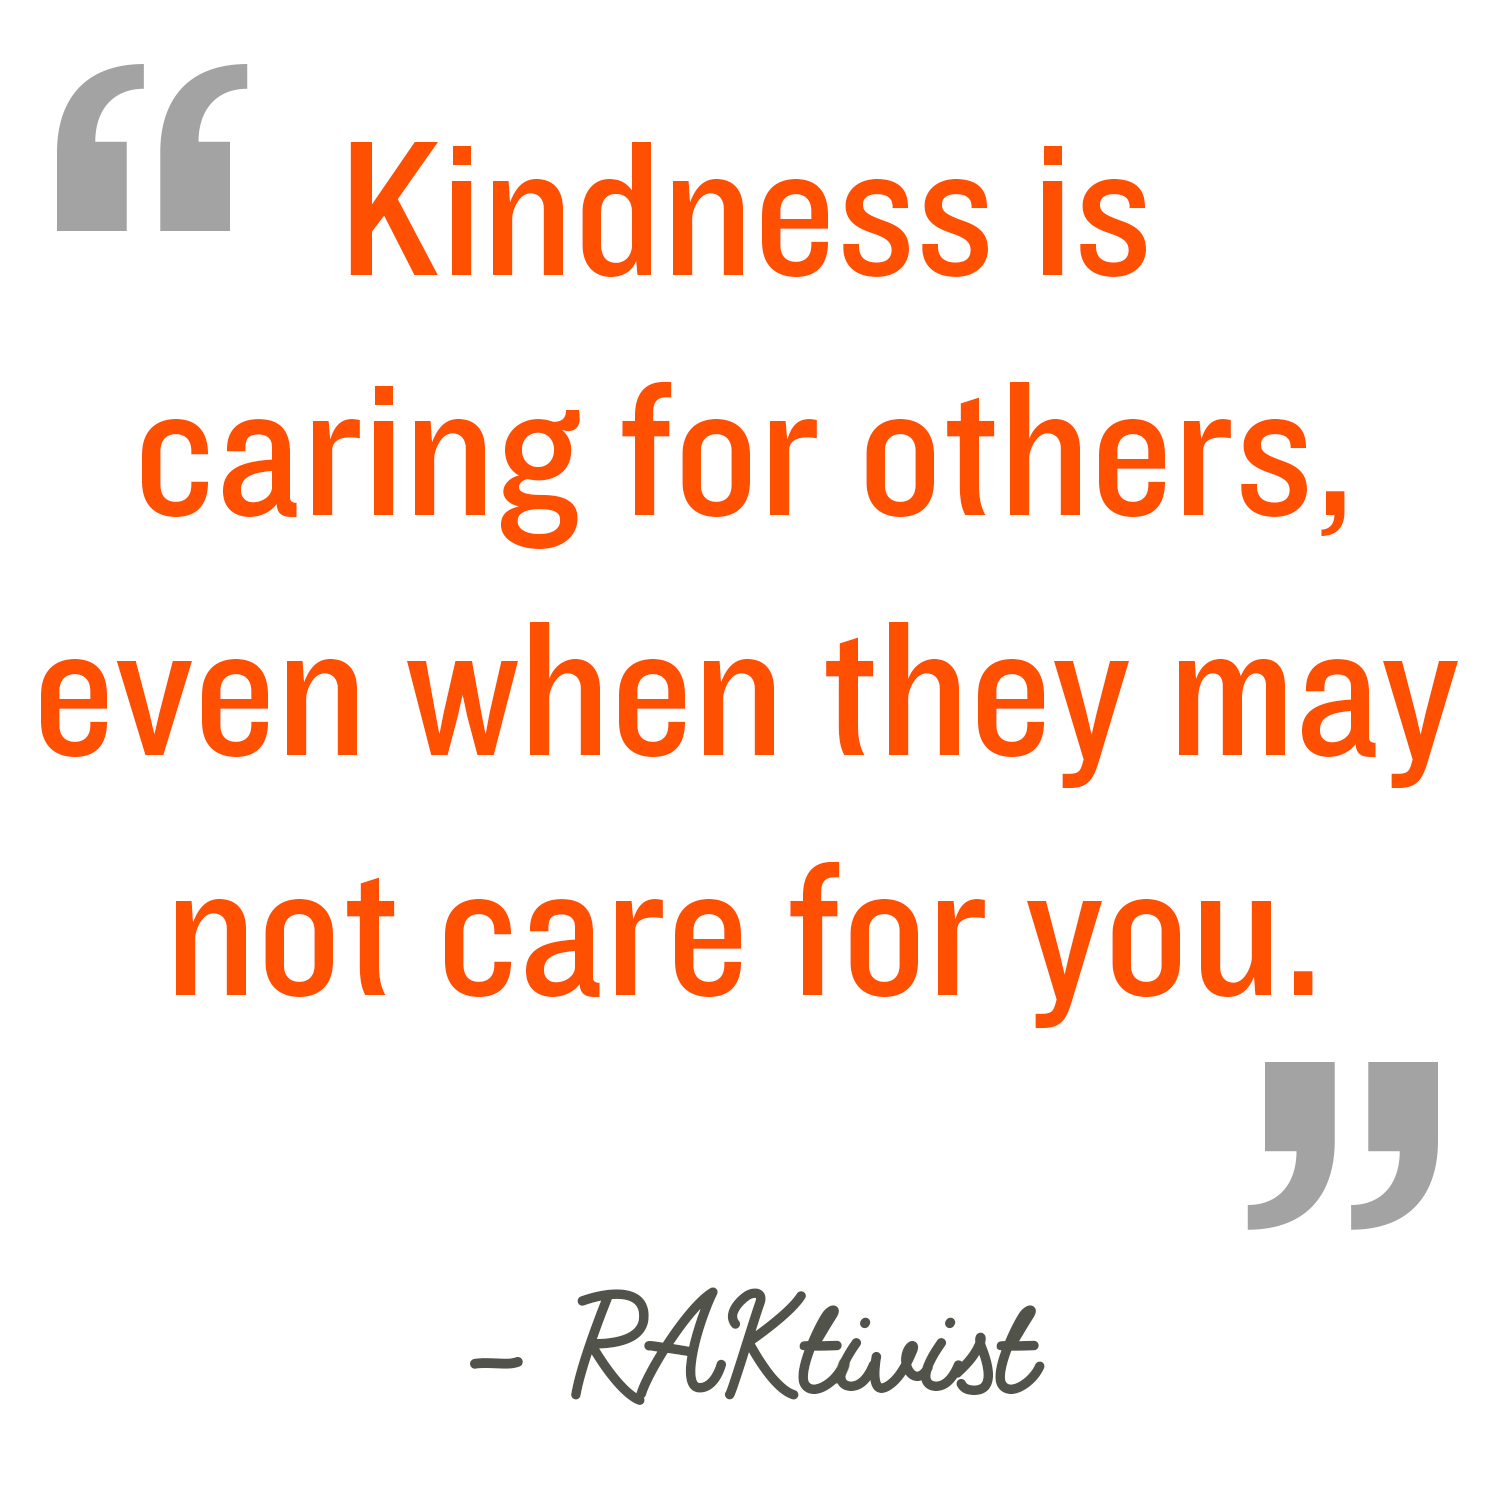 Random Acts of Kindness | Kindness Quote | Kindness is caring for ...